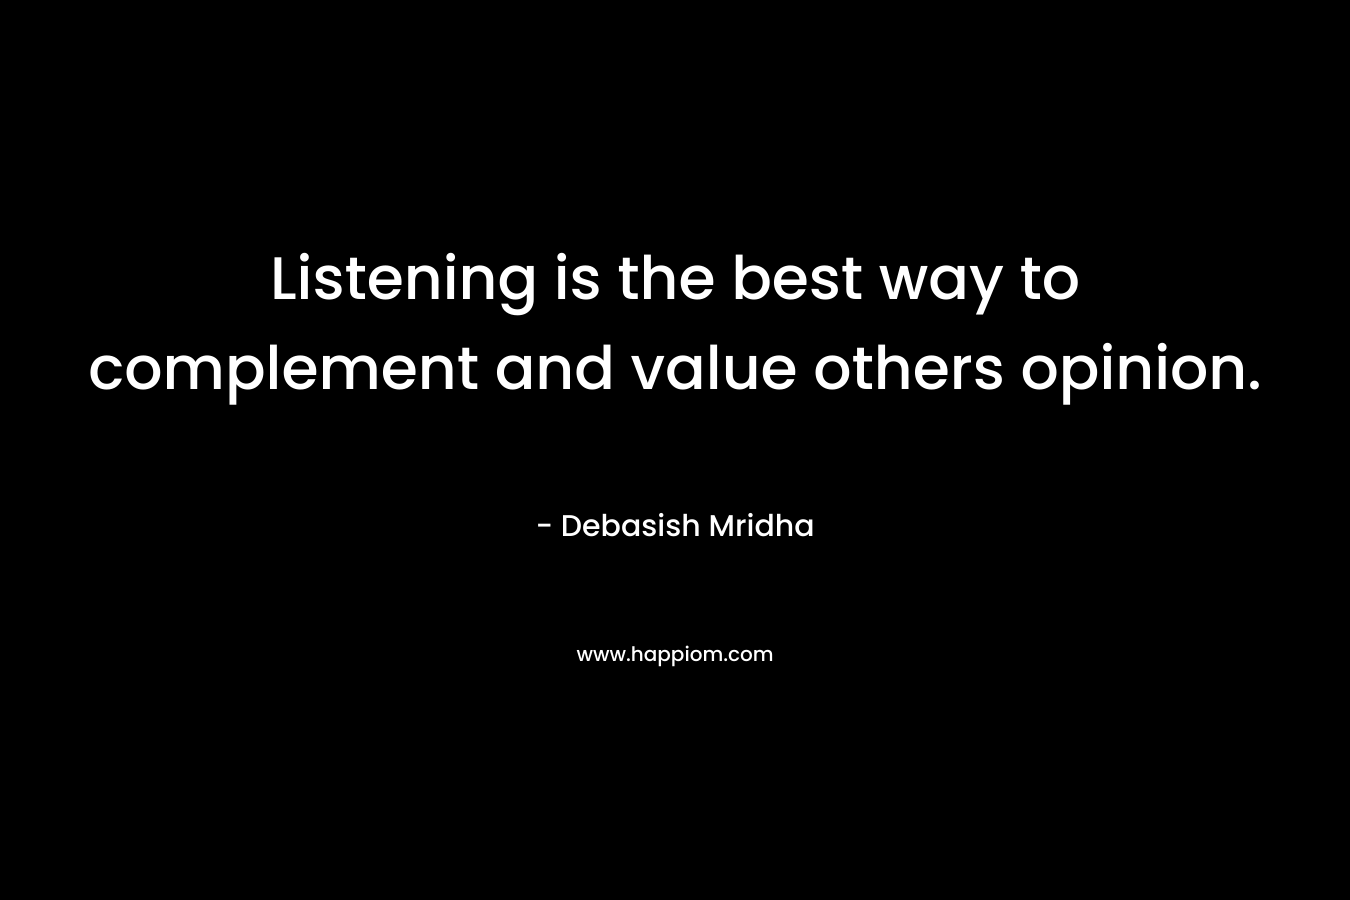 Listening is the best way to complement and value others opinion.